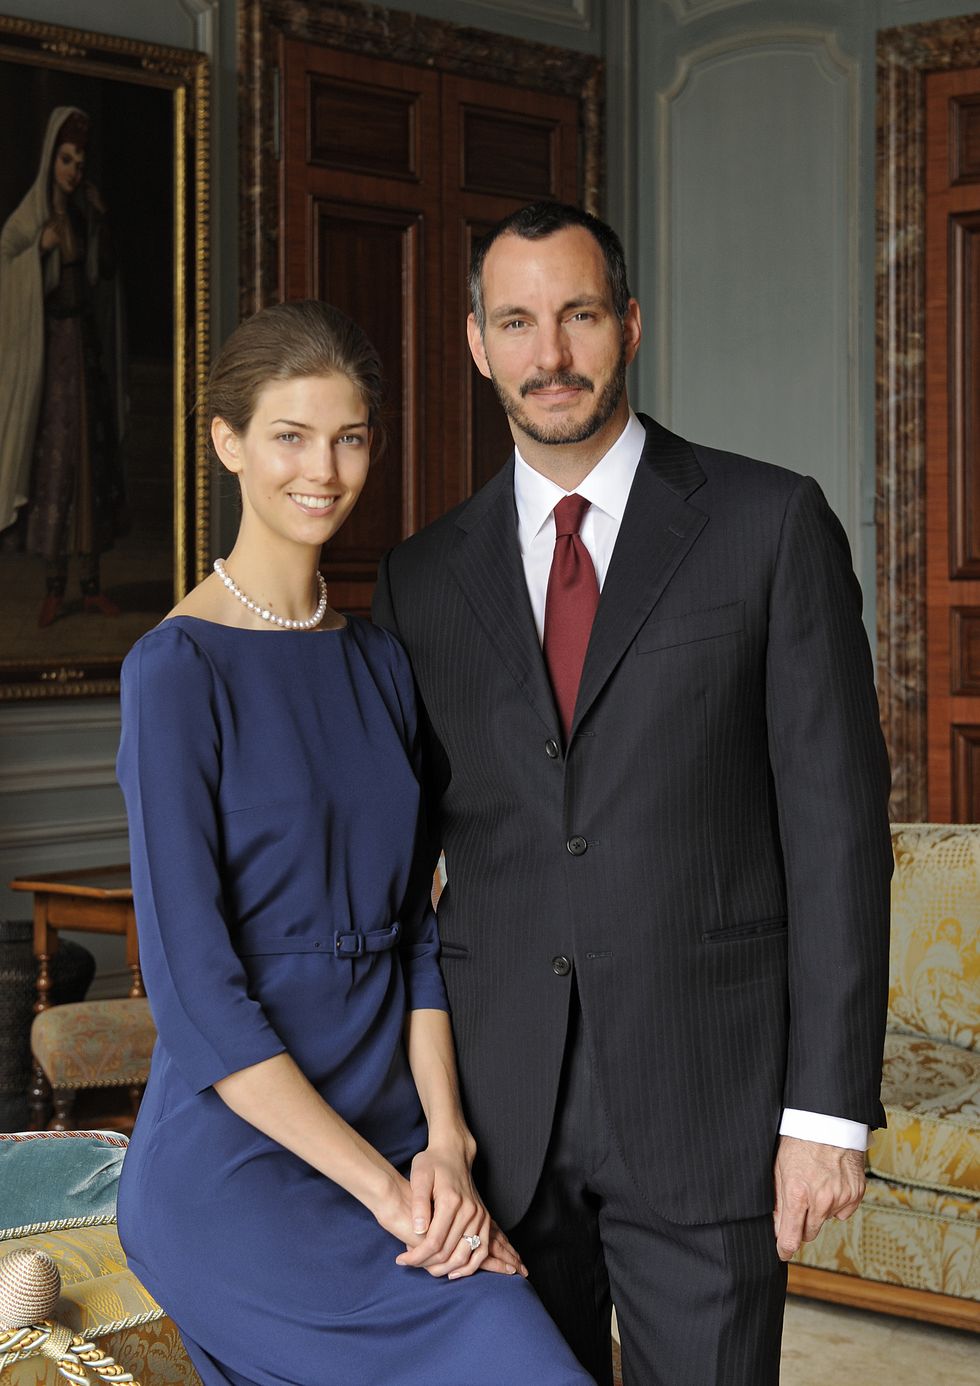 The Aga Khan Announces the Engagement Of His Eldest Son To Ms. Kendra Spears